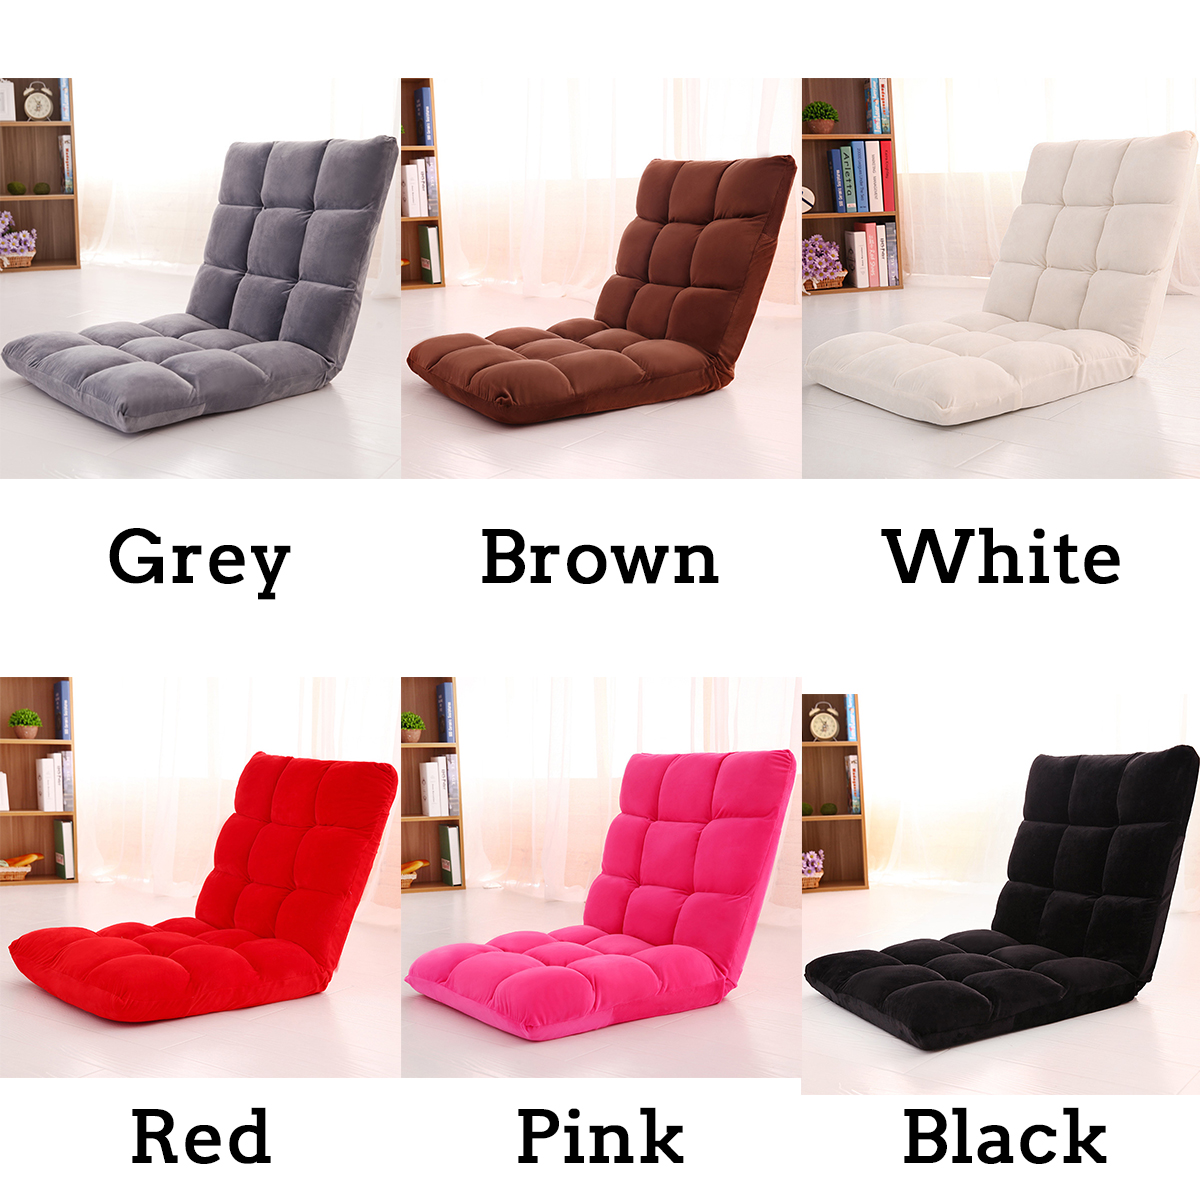 Adjustable Lazy Sofa Cushioned Floor Lounge Chair Living Room Leisure Chaise Chair 57